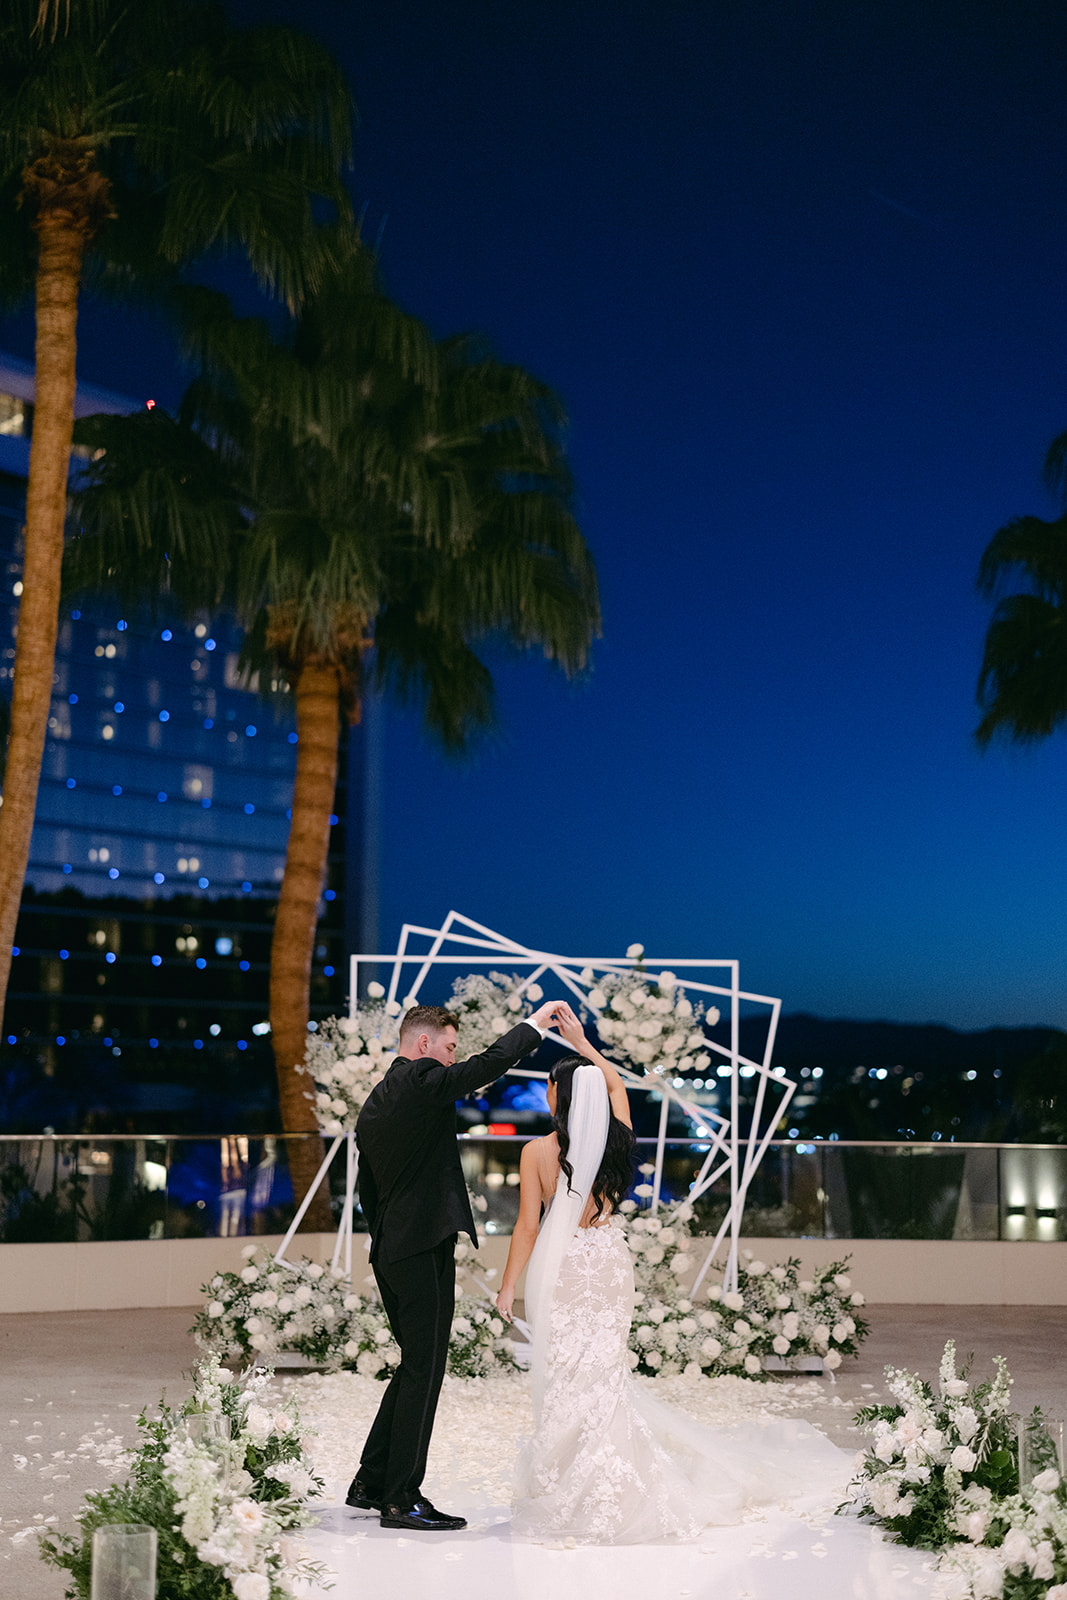 Bride and Groom dancing with palm trees and night sky in background 